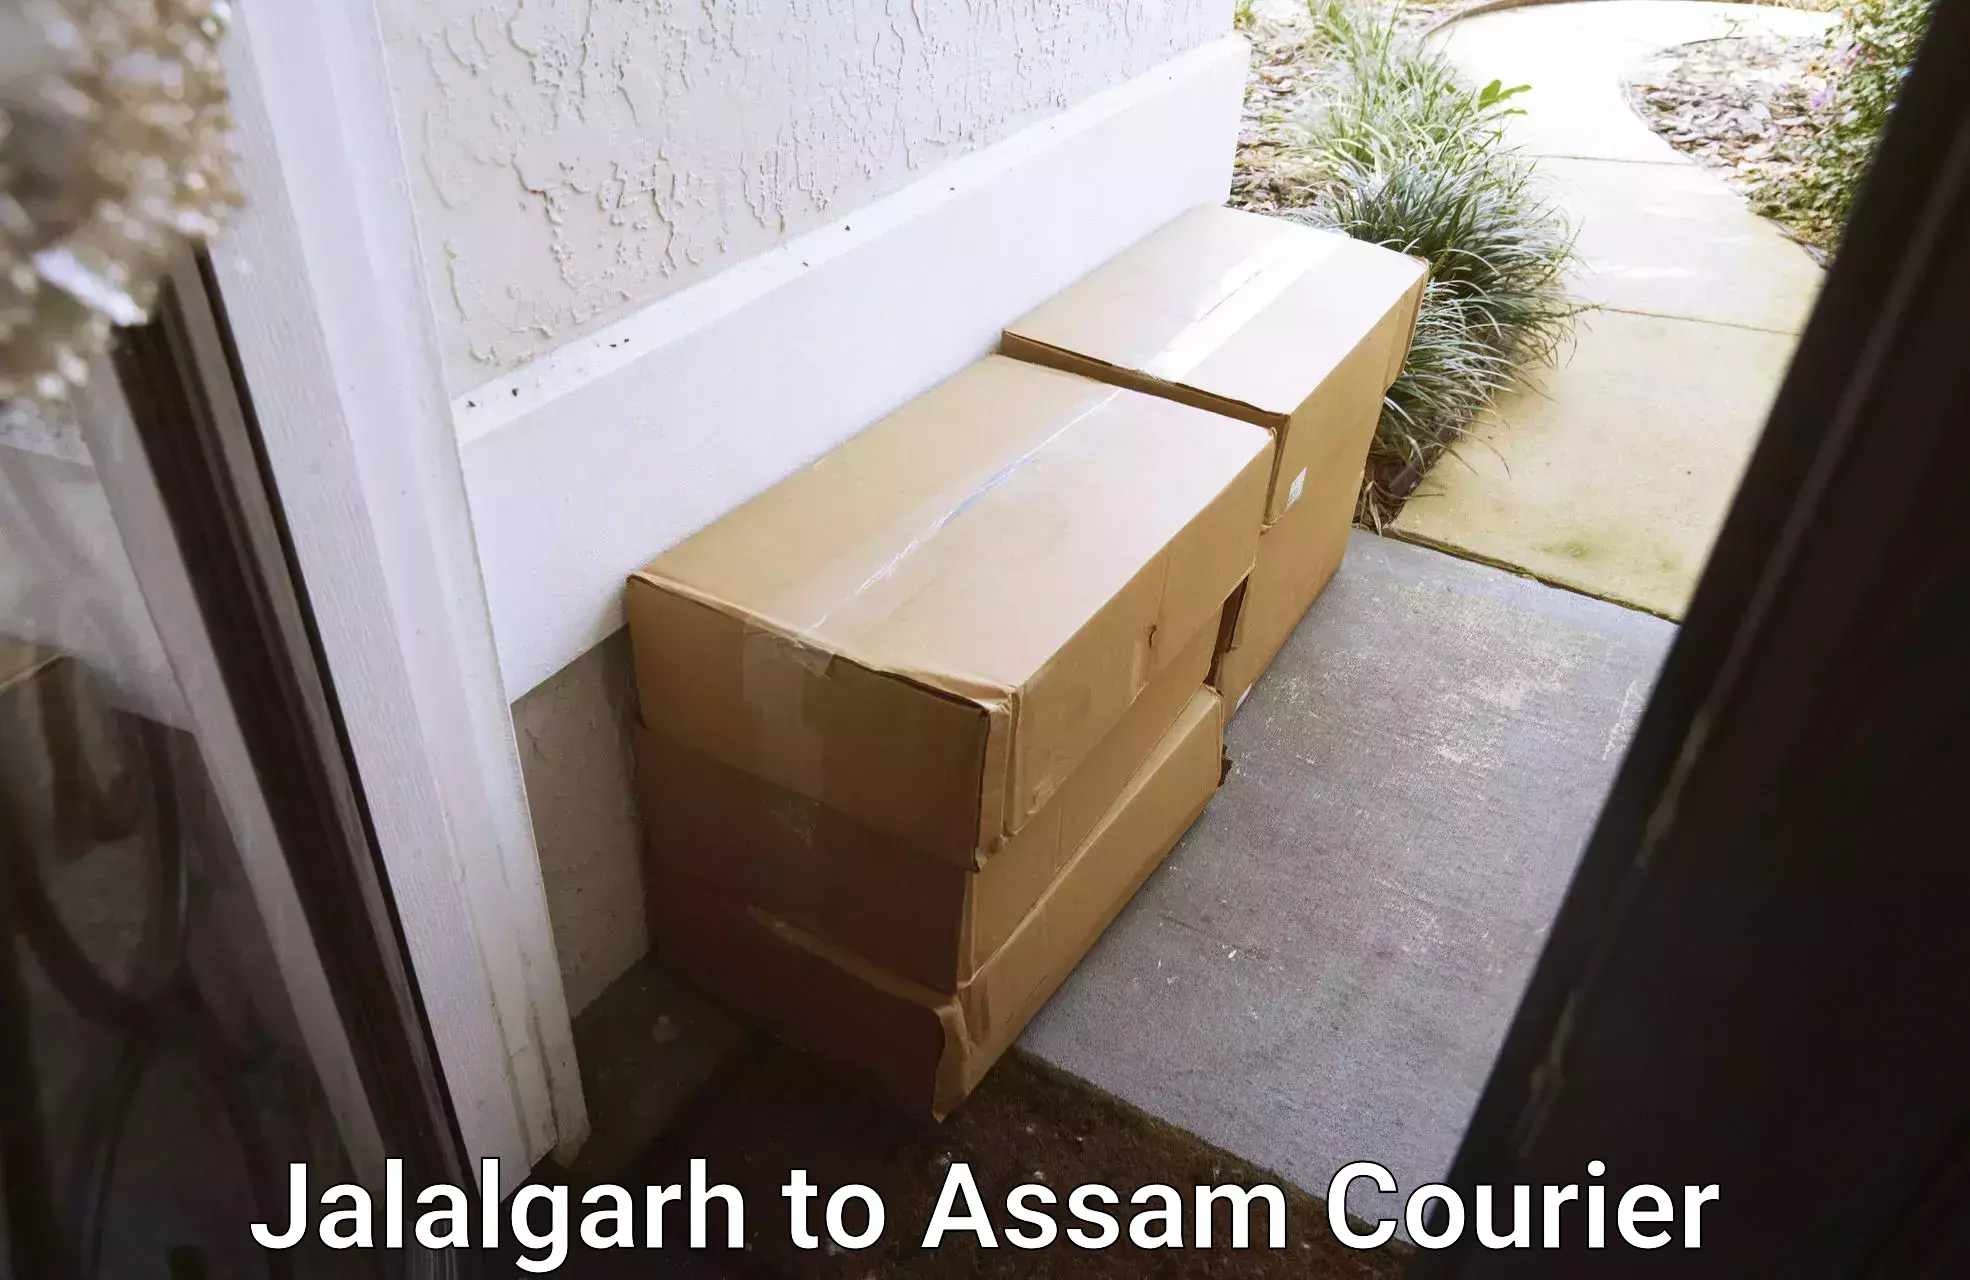 Moving and storage services Jalalgarh to Assam